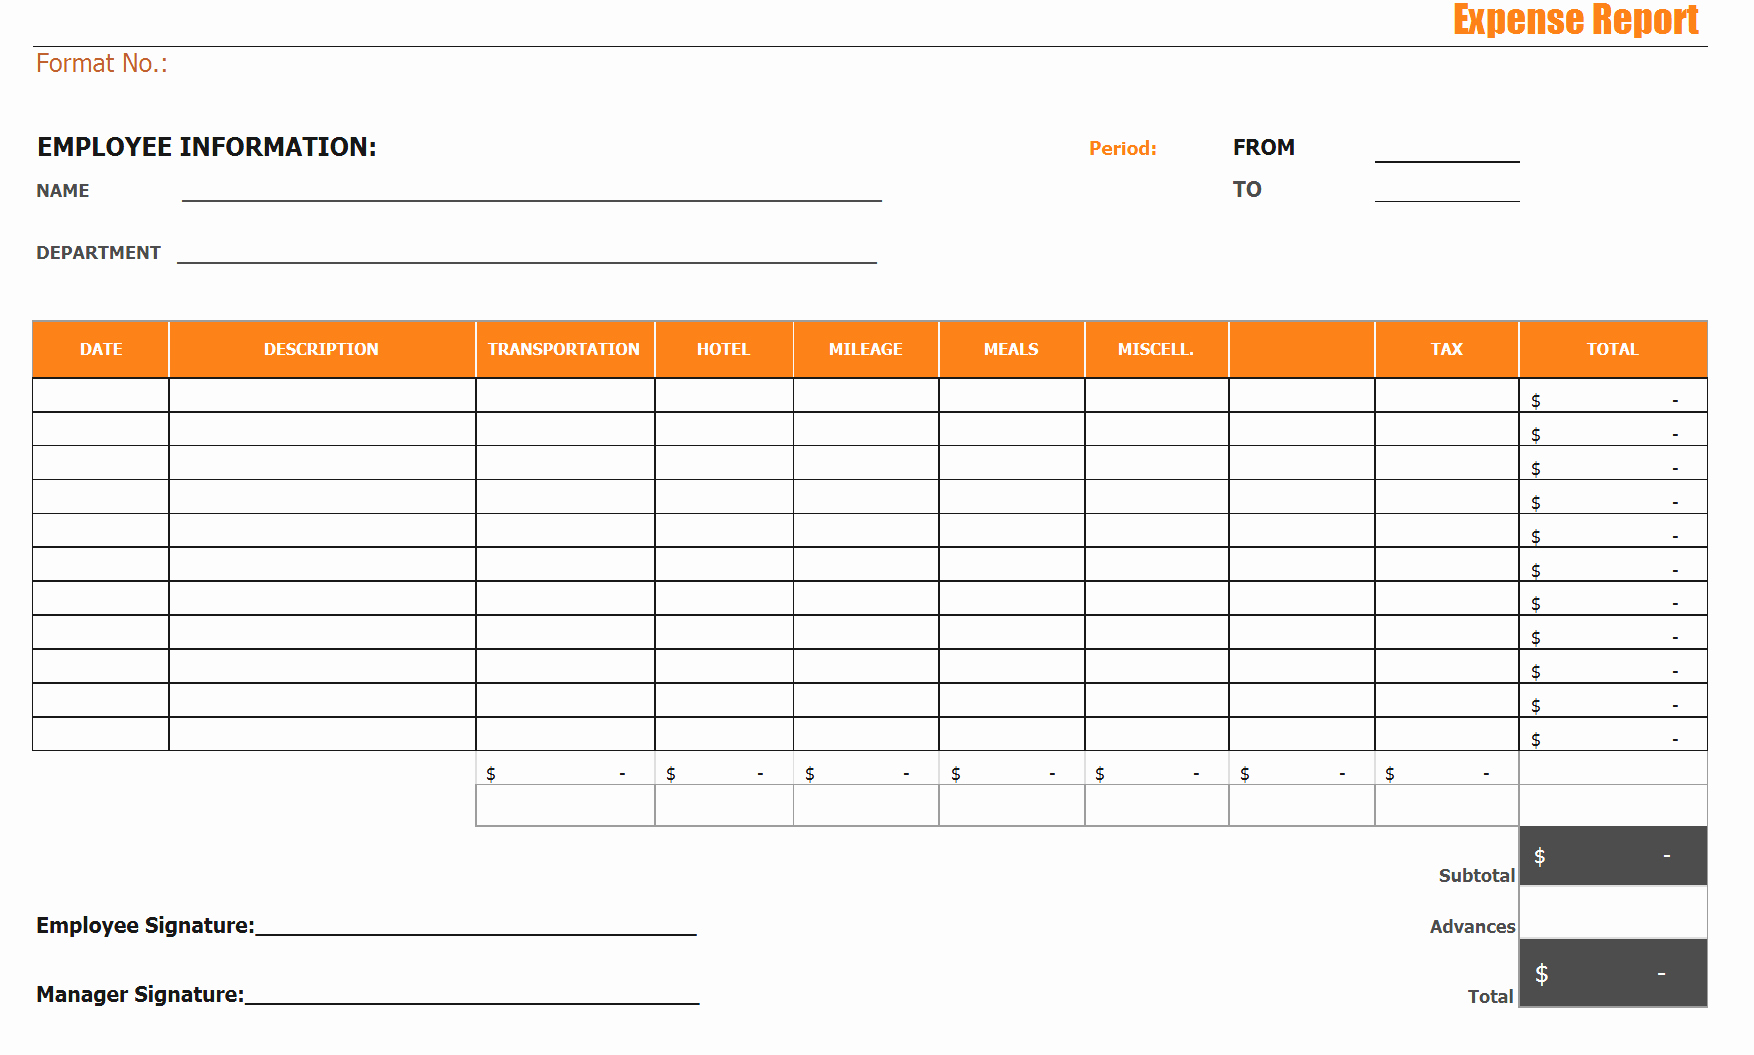 Expense Report Template Free Best Of Blank Expense Report Mughals